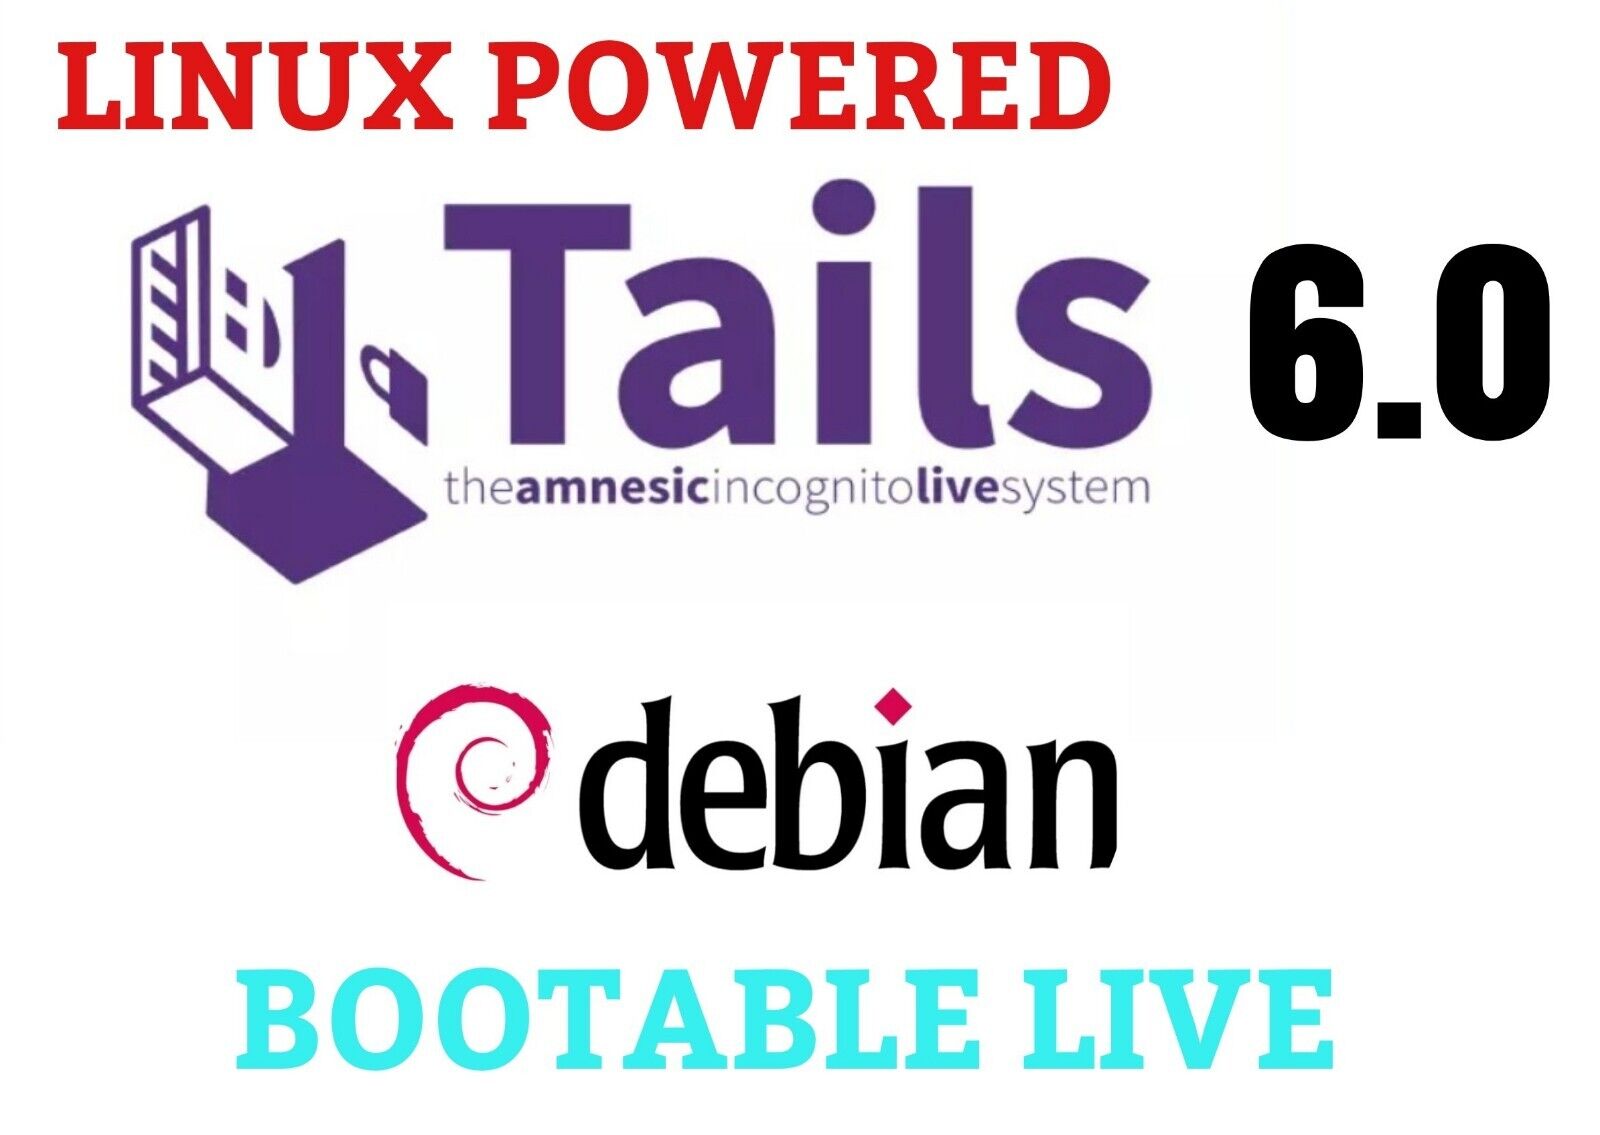 Tails Linux 6.0 32 Gb USB 3.2 Drive, Safe, Secure, Anonymous, Live Bootable